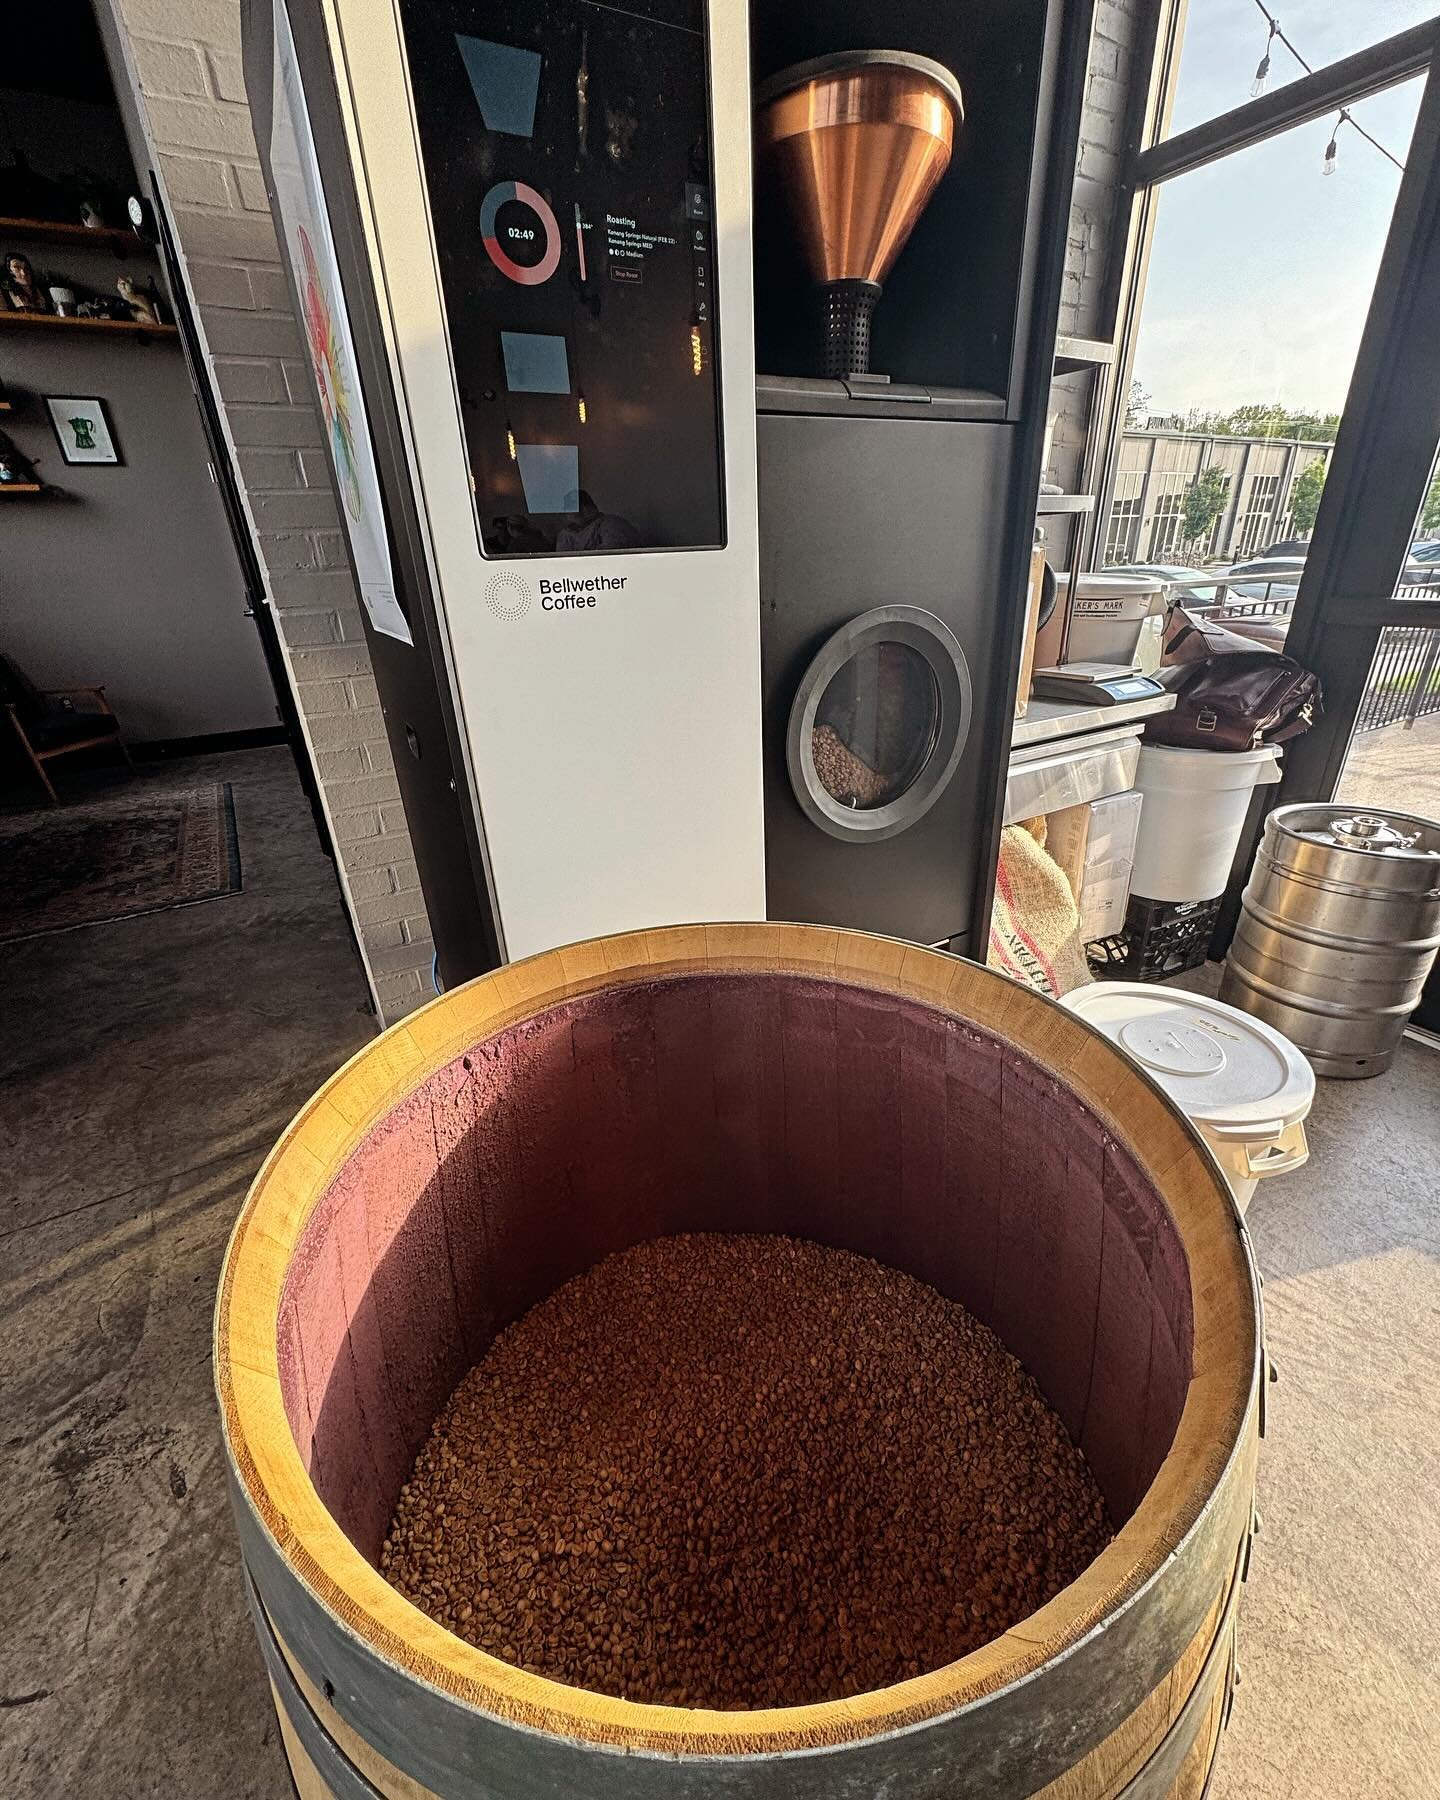 What&rsquo;s in the barrel??
🍷 ☕️ 
A new (and socially acceptable) way to get your wine fix before 8am.

This naturally processed coffee is painstakingly cared for in the extremely humid environment to ensure consistency and quality. This coffee was